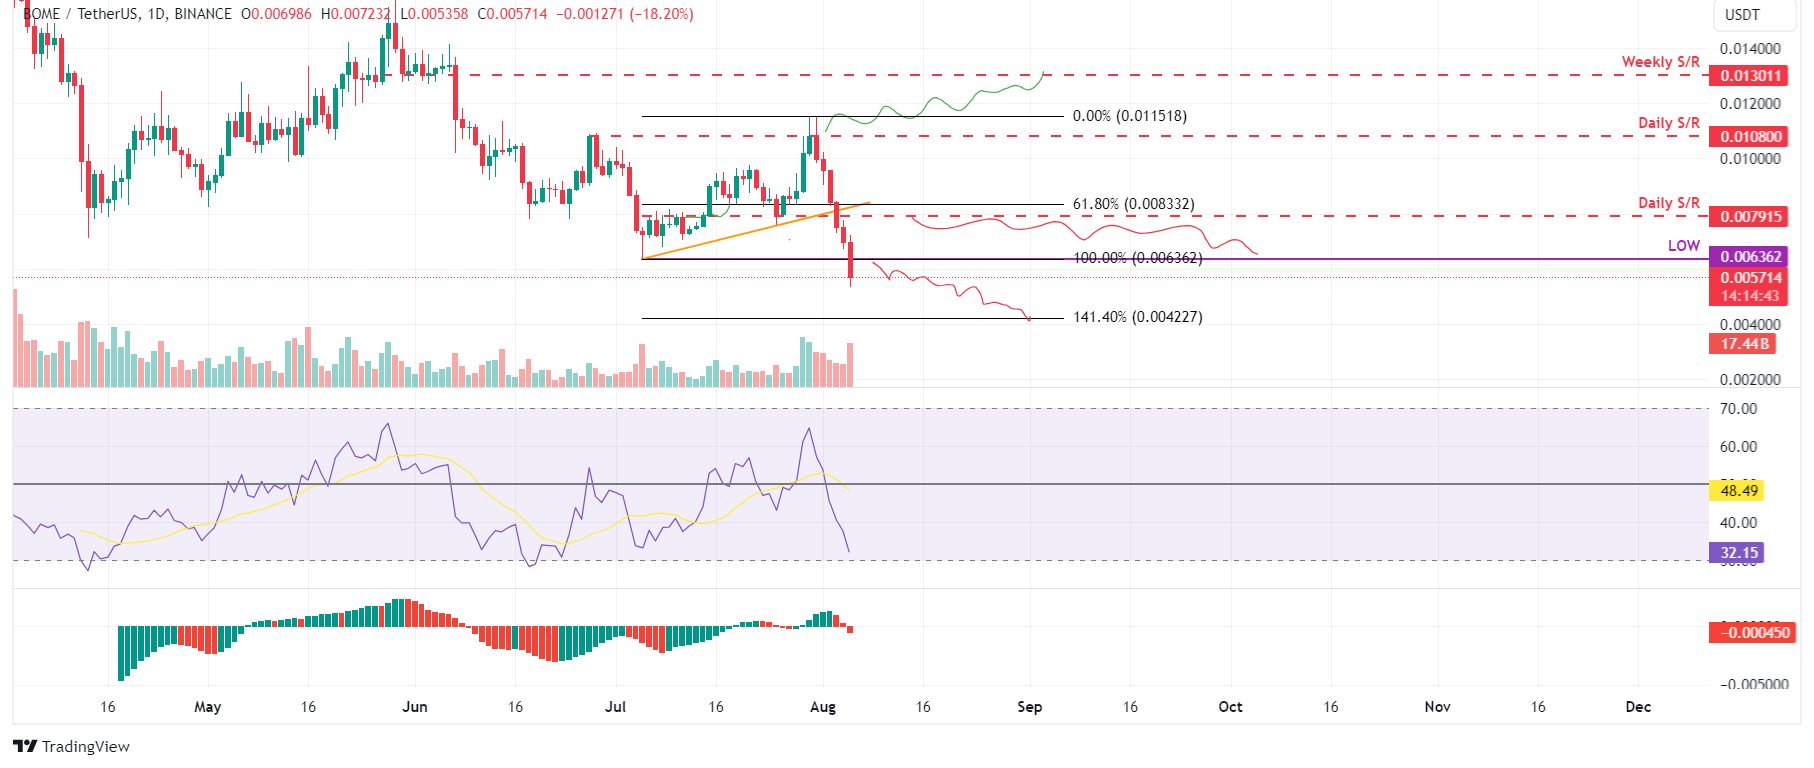 BOME/USDT daily chart